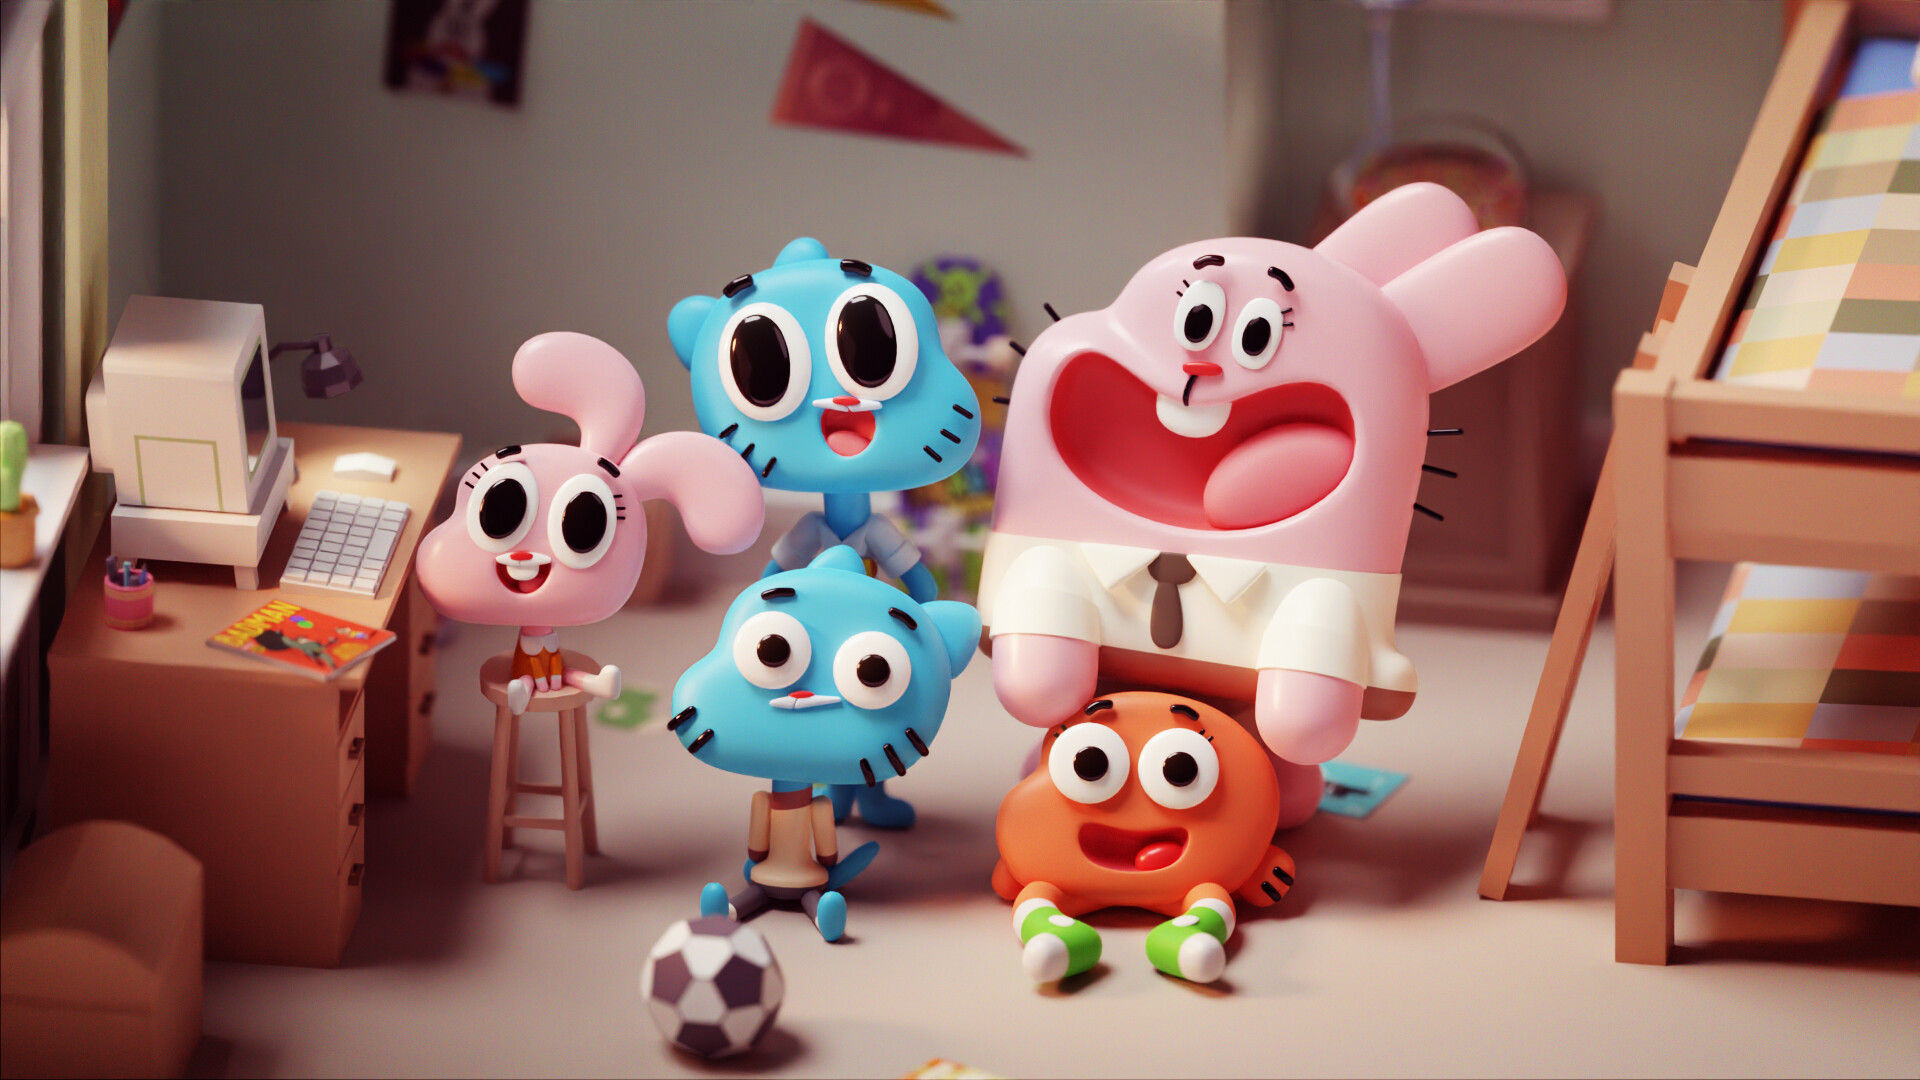 The amazing world of gumball is real!